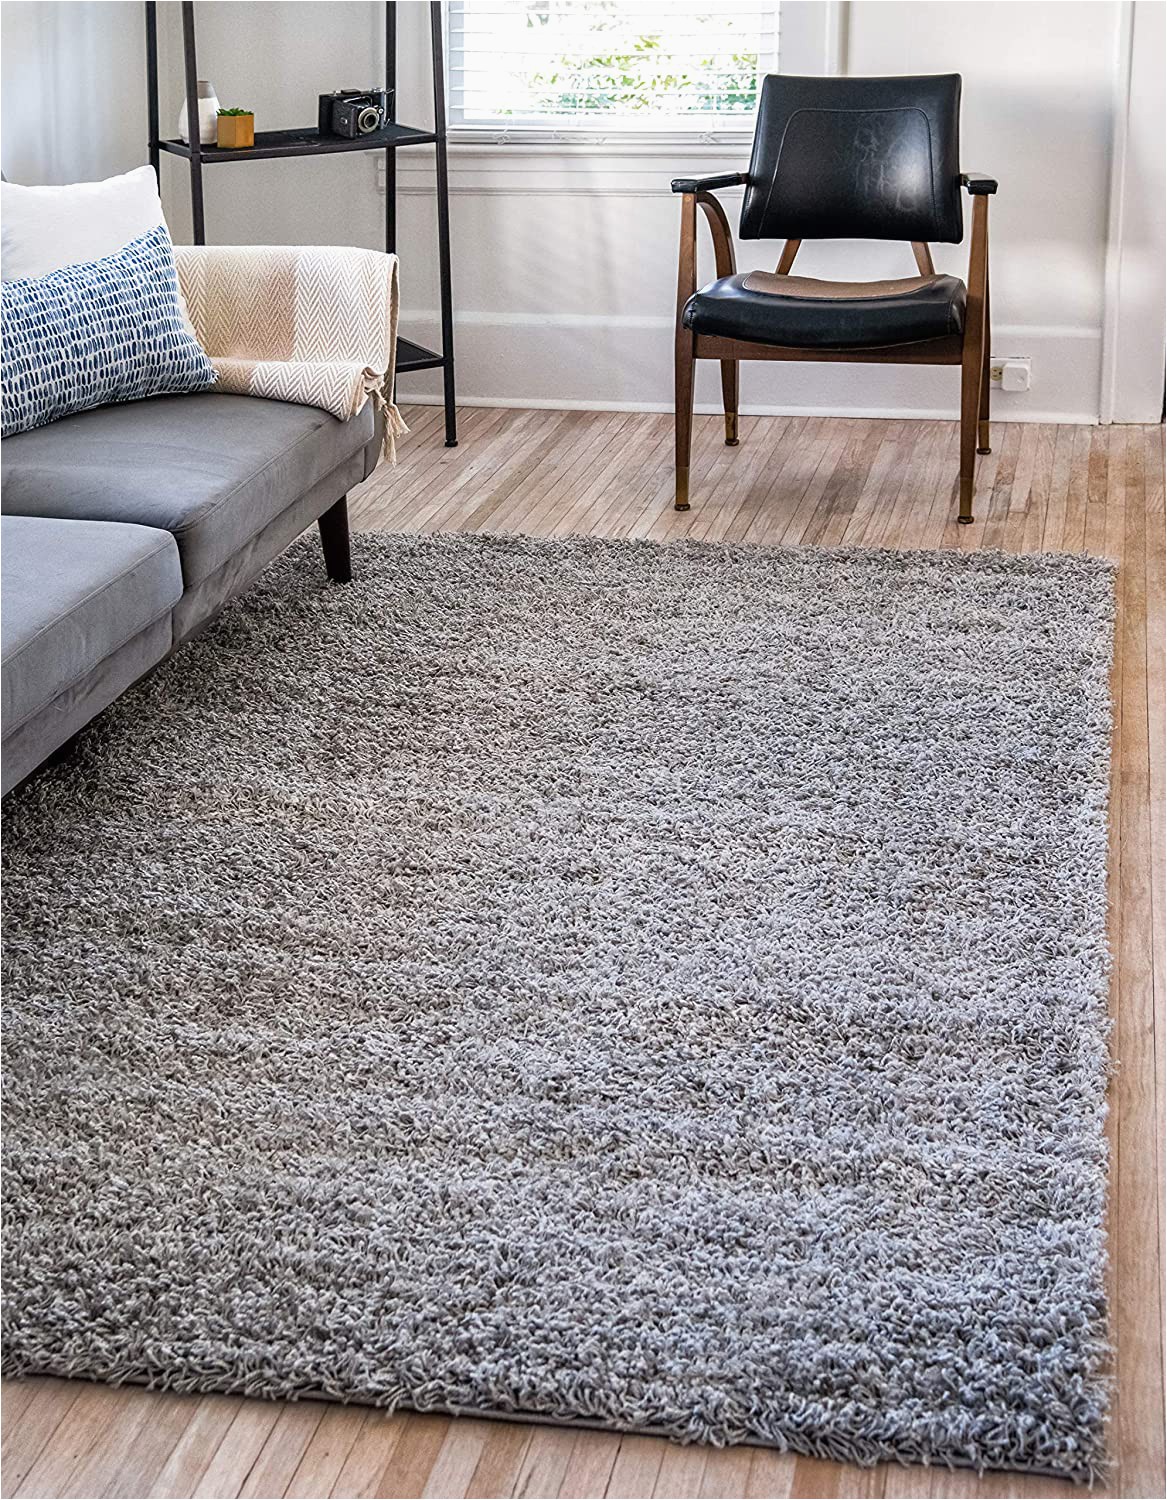 Best area Rugs On Amazon Unique Loom solo solid Shag Collection Modern Plush Cloud Gray area Rug 5 0 X 8 0